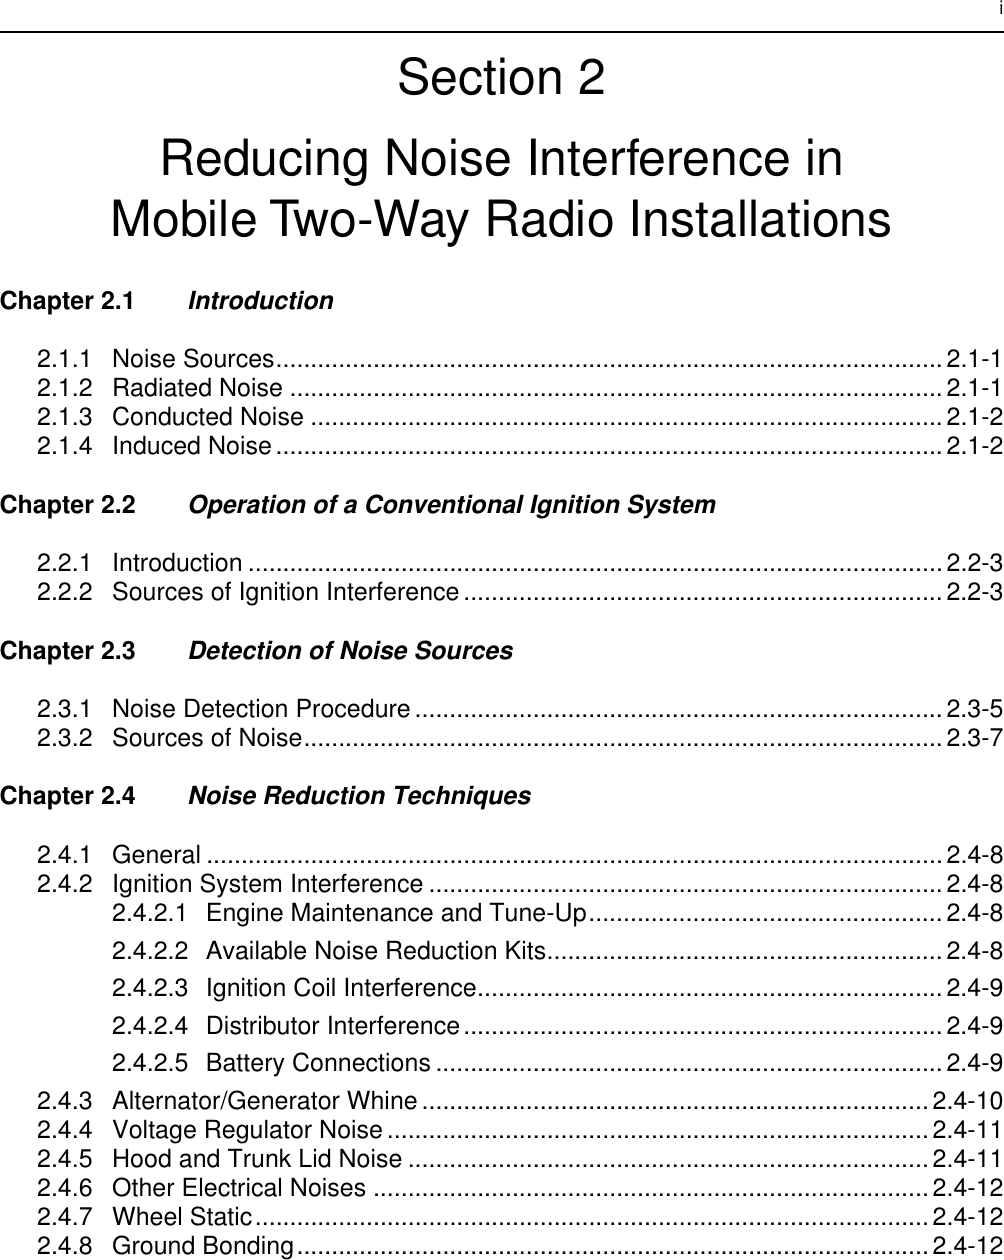  i Section 2Reducing Noise Interference inMobile Two-Way Radio Installations Chapter 2.1 Introduction 2.1.1 Noise Sources................................................................................................2.1-12.1.2 Radiated Noise ..............................................................................................2.1-12.1.3 Conducted Noise ...........................................................................................2.1-22.1.4 Induced Noise ................................................................................................2.1-2 Chapter 2.2 Operation of a Conventional Ignition System 2.2.1 Introduction ....................................................................................................2.2-32.2.2 Sources of Ignition Interference .....................................................................2.2-3 Chapter 2.3 Detection of Noise Sources 2.3.1 Noise Detection Procedure ............................................................................2.3-52.3.2 Sources of Noise............................................................................................2.3-7 Chapter 2.4 Noise Reduction Techniques 2.4.1 General ..........................................................................................................2.4-82.4.2 Ignition System Interference .......................................................................... 2.4-82.4.2.1 Engine Maintenance and Tune-Up...................................................2.4-82.4.2.2 Available Noise Reduction Kits......................................................... 2.4-82.4.2.3 Ignition Coil Interference................................................................... 2.4-92.4.2.4 Distributor Interference.....................................................................2.4-92.4.2.5 Battery Connections .........................................................................2.4-92.4.3 Alternator/Generator Whine .........................................................................2.4-102.4.4 Voltage Regulator Noise ..............................................................................2.4-112.4.5 Hood and Trunk Lid Noise ........................................................................... 2.4-112.4.6 Other Electrical Noises ................................................................................2.4-122.4.7 Wheel Static................................................................................................. 2.4-122.4.8 Ground Bonding........................................................................................... 2.4-12